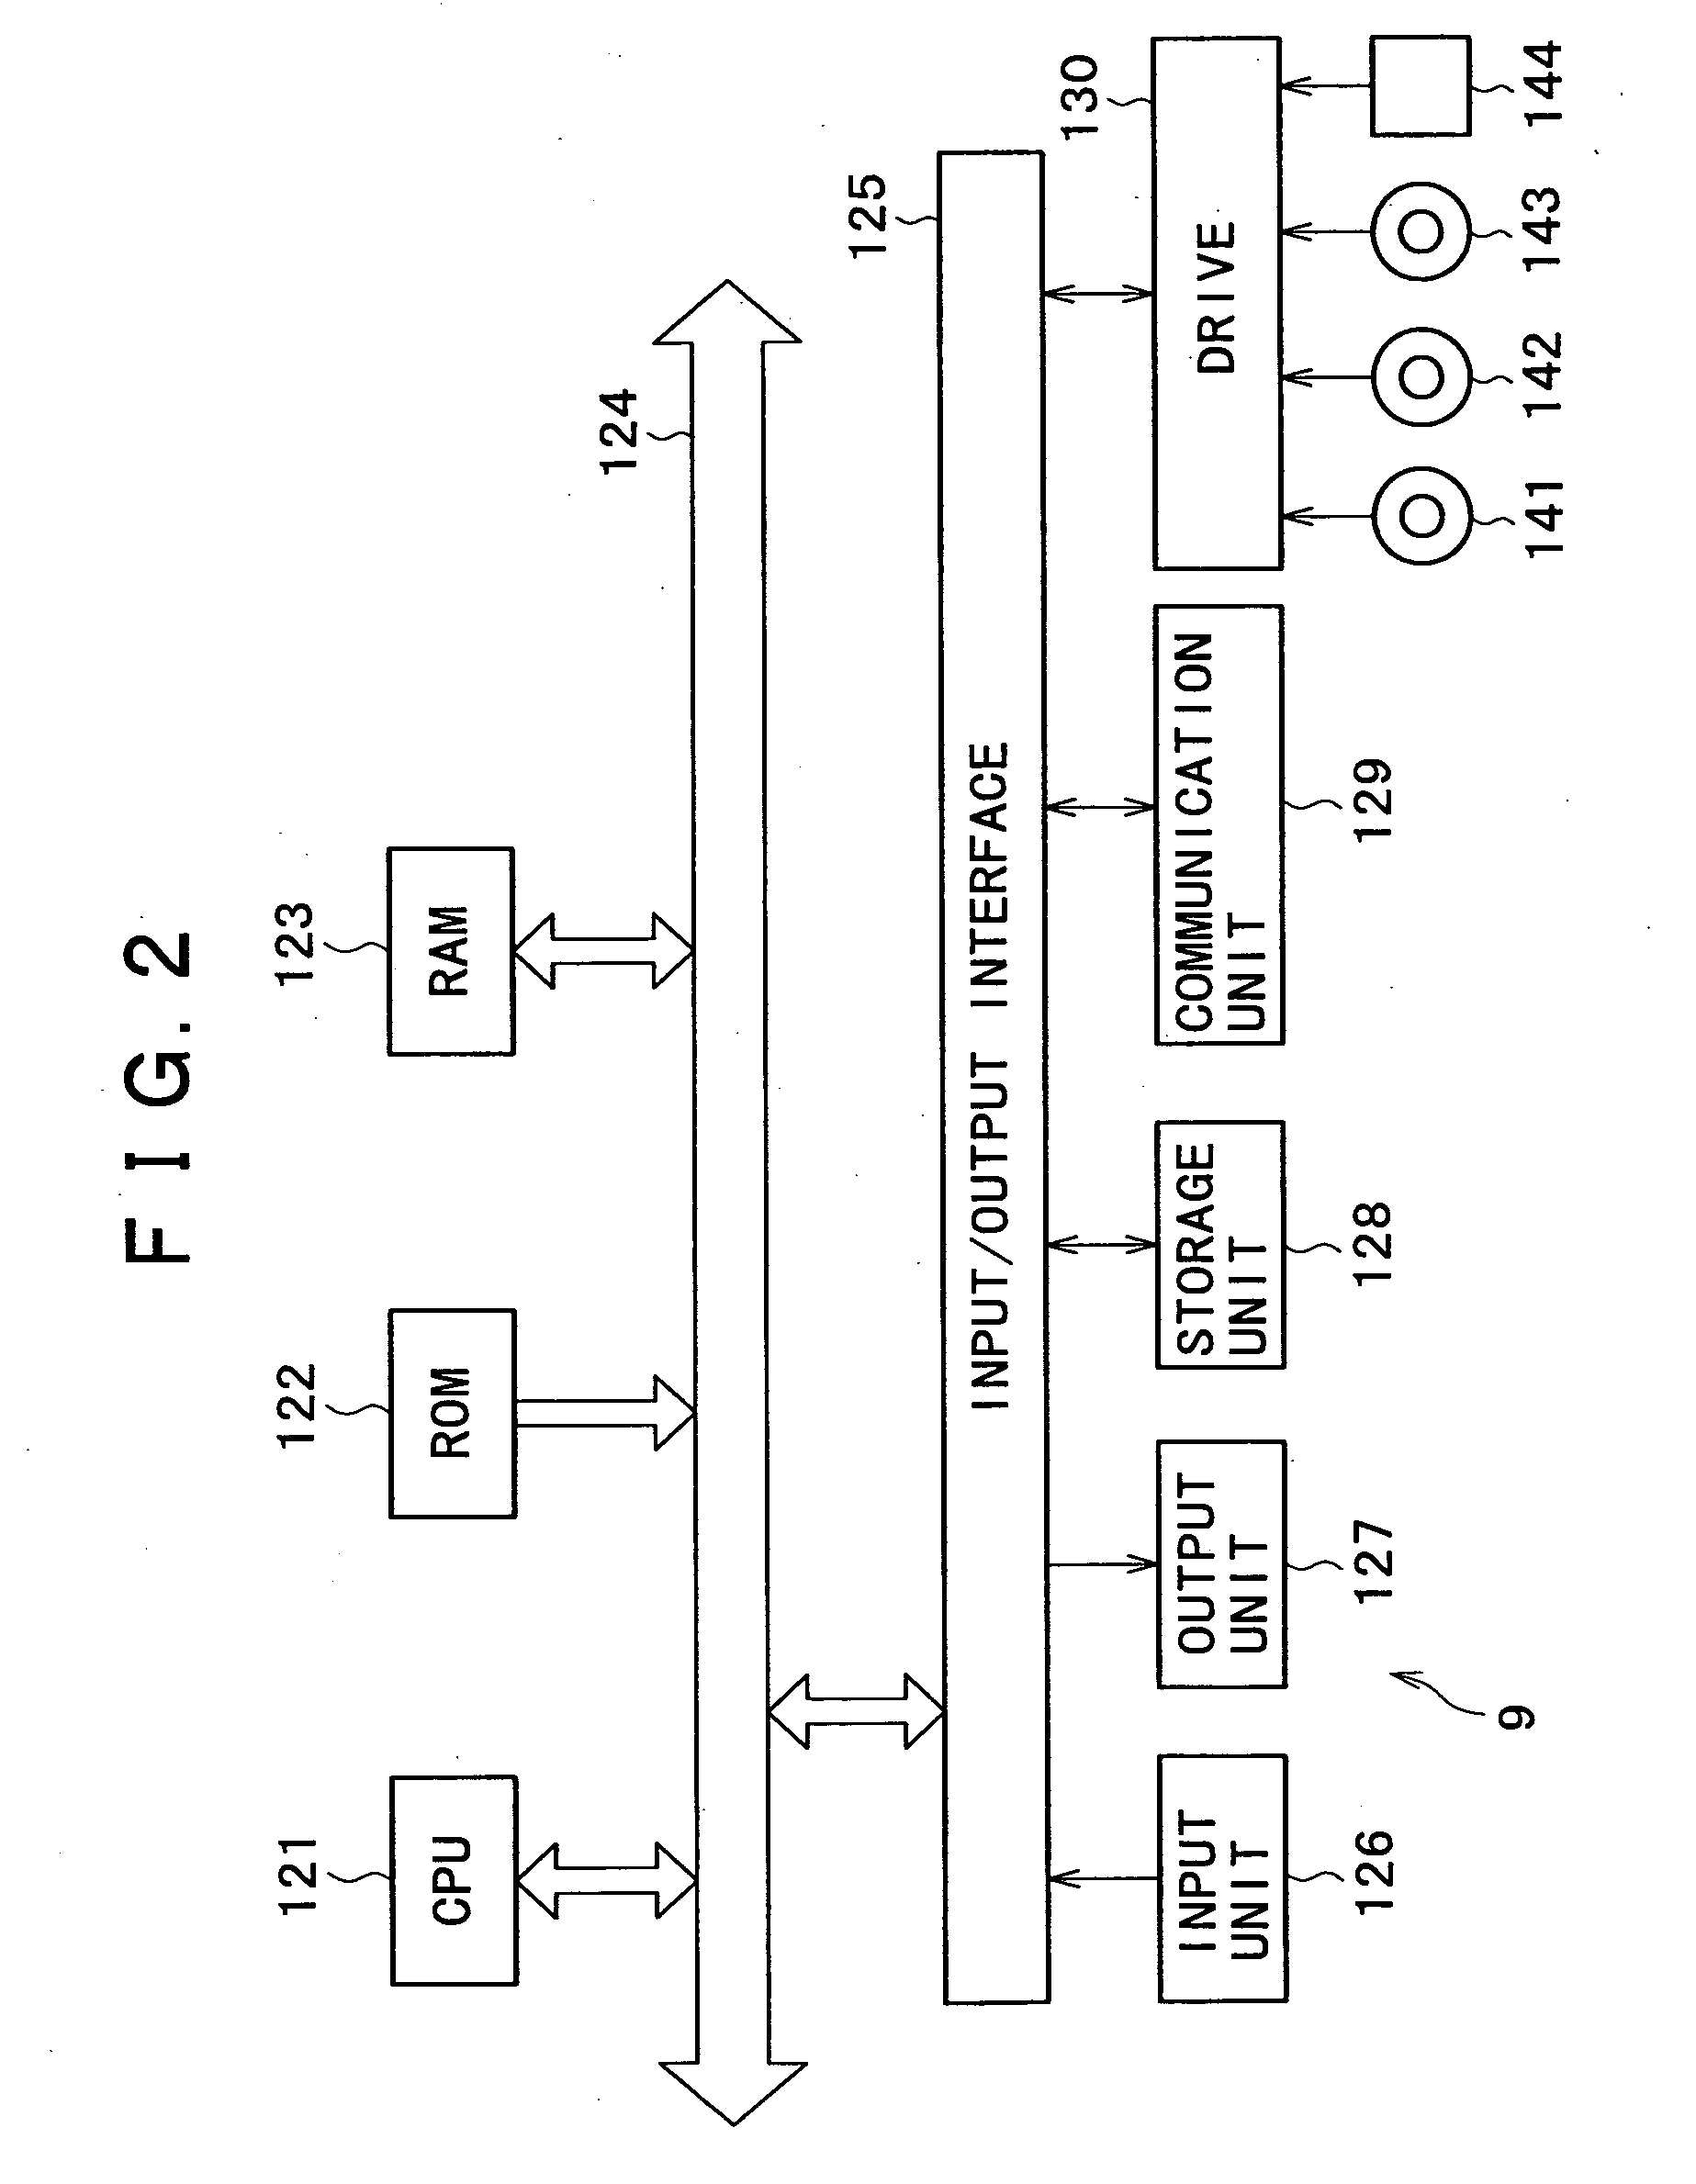 Information processing system